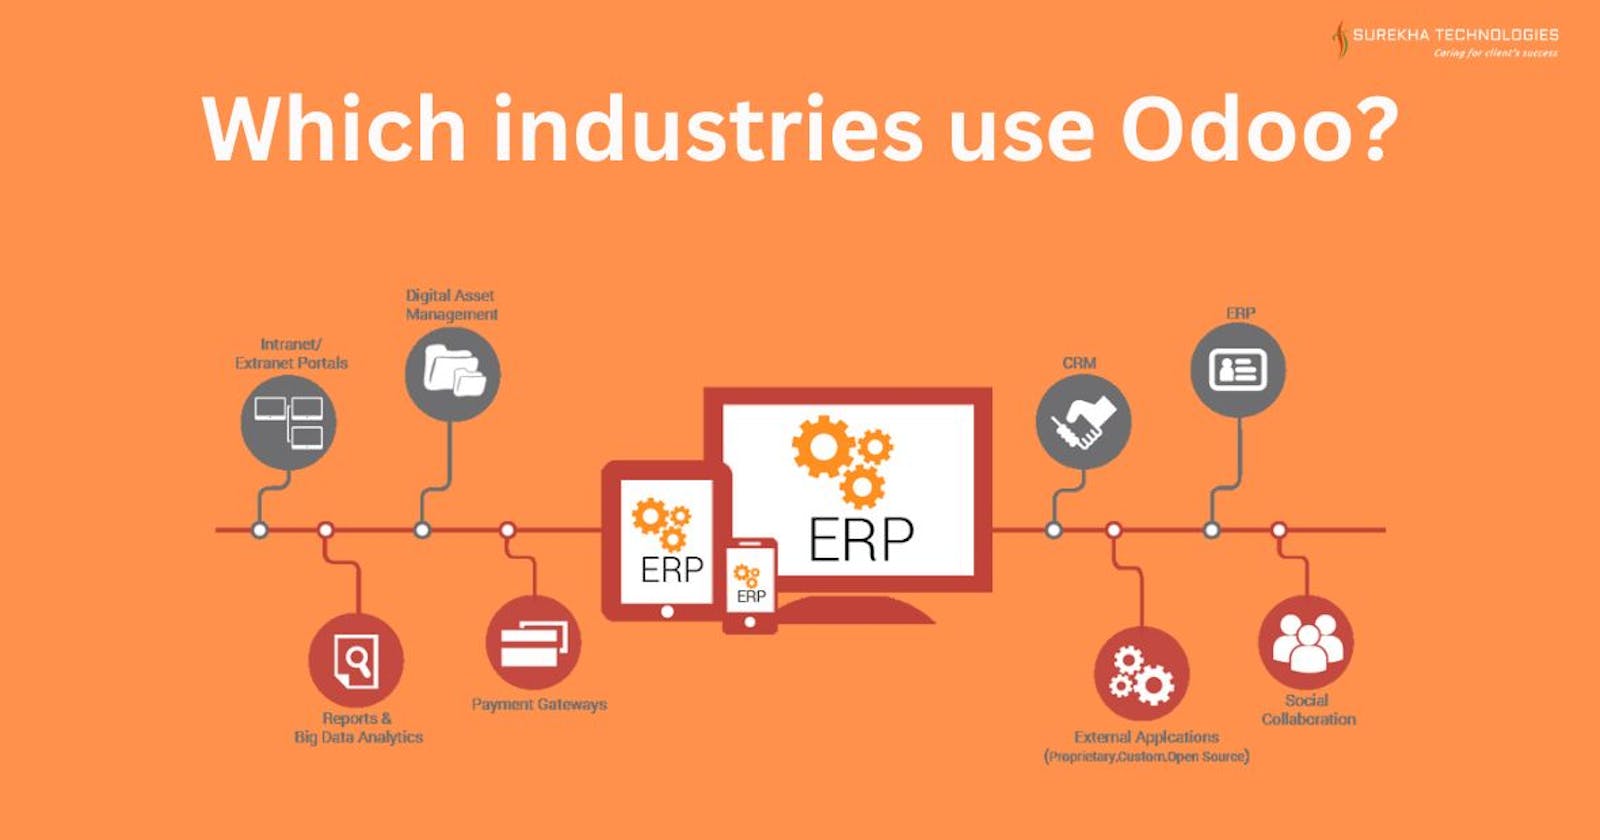 Which industries use Odoo?